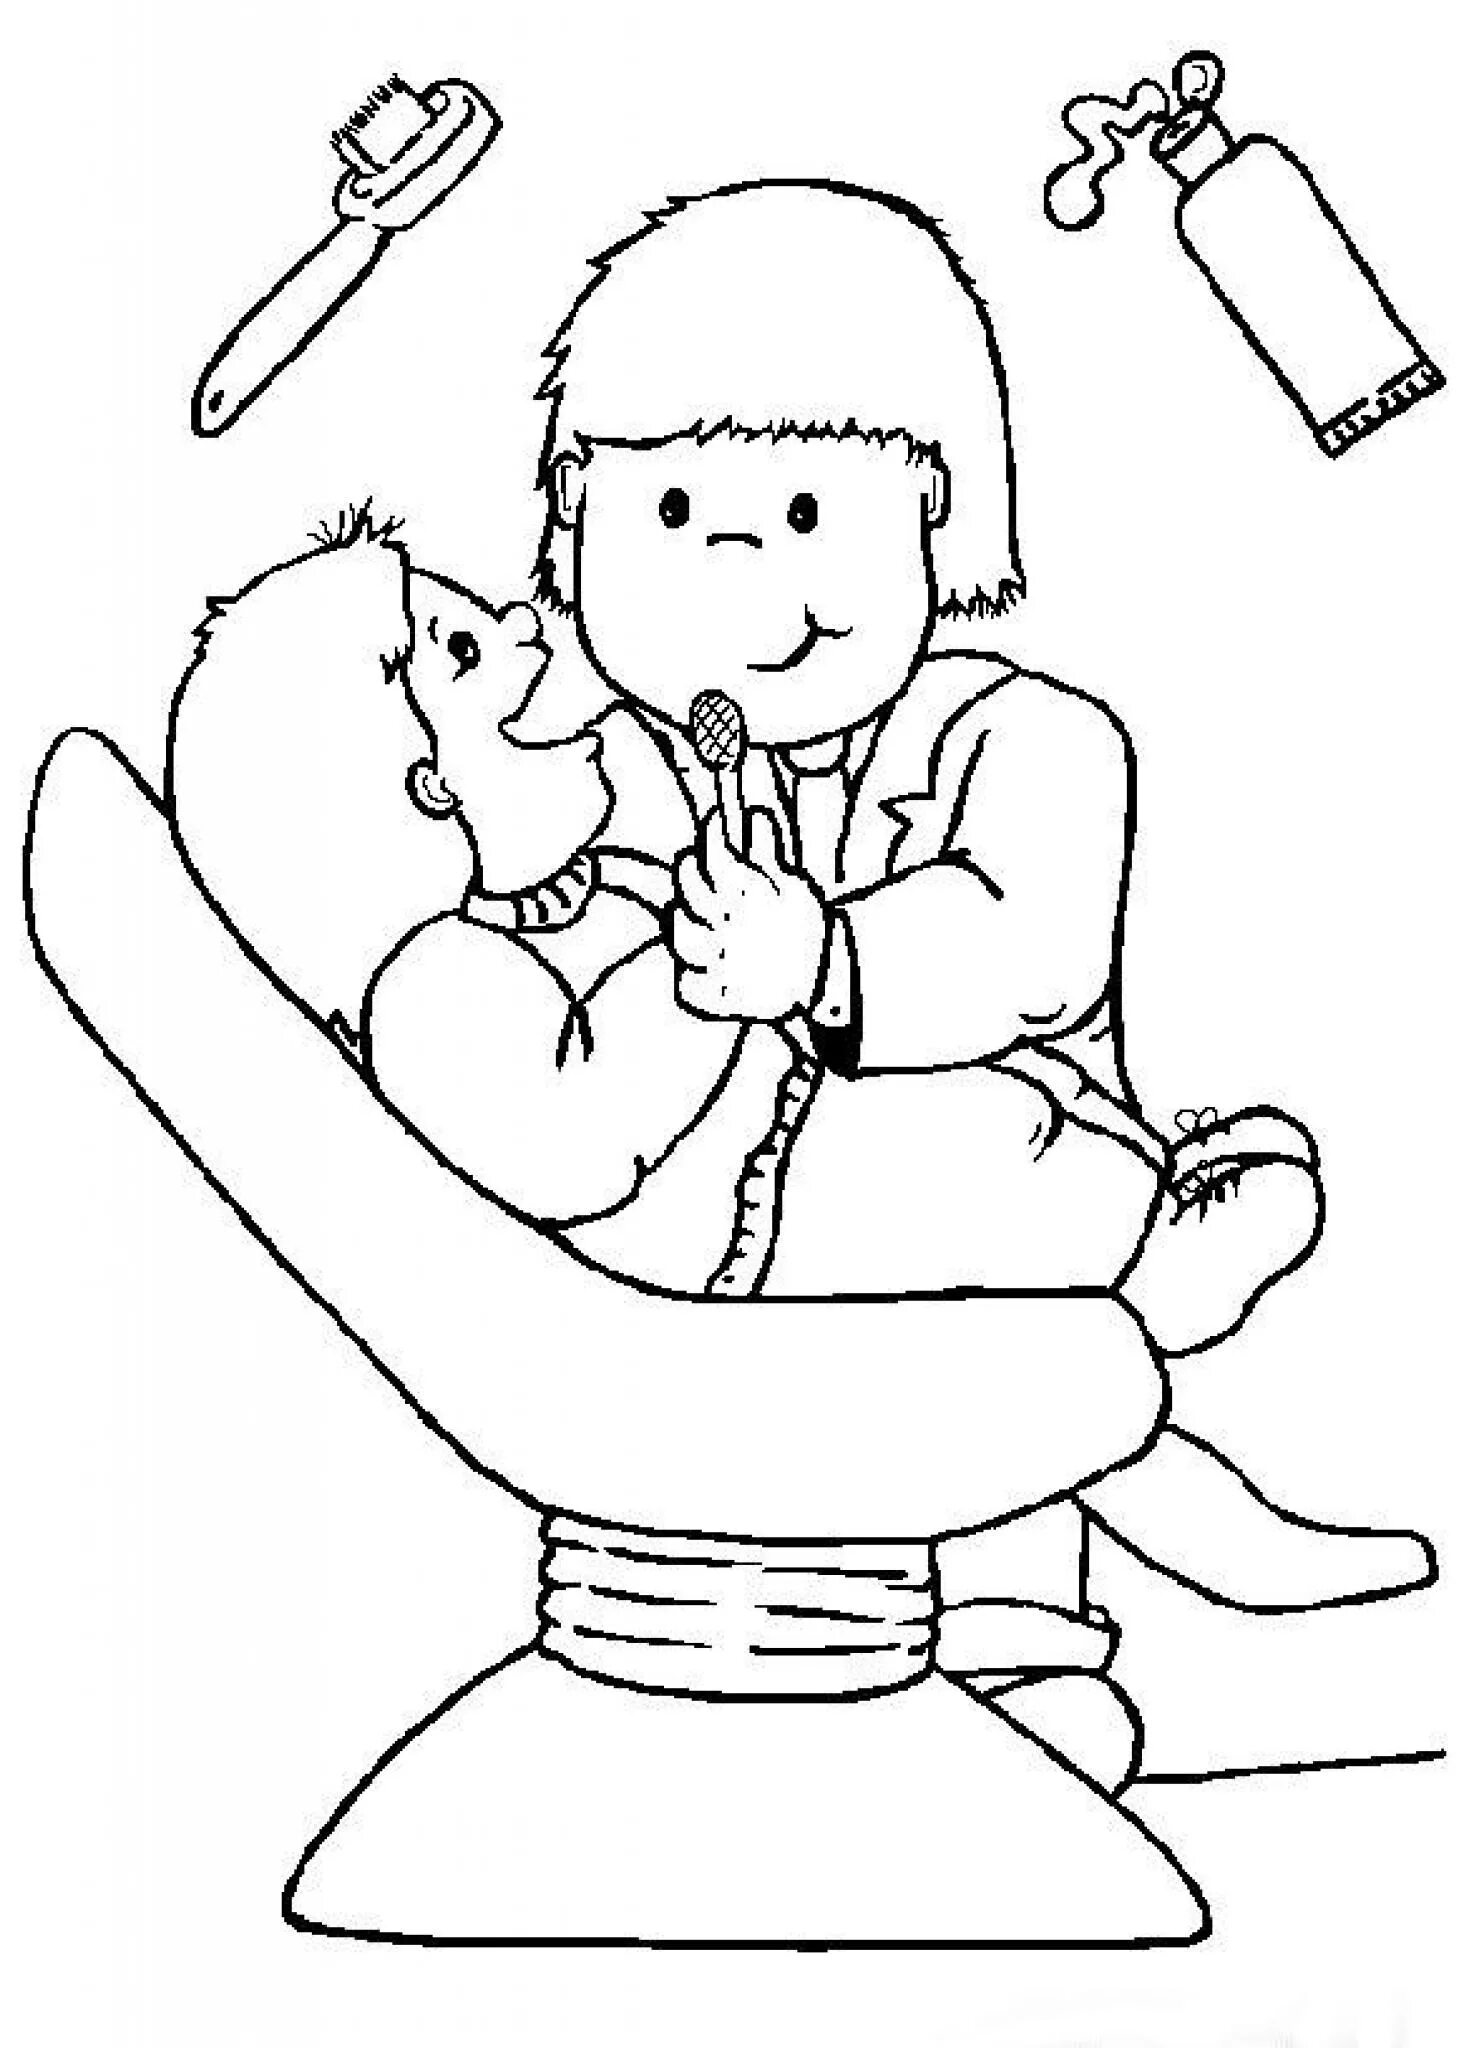 Intensive dentistry coloring page